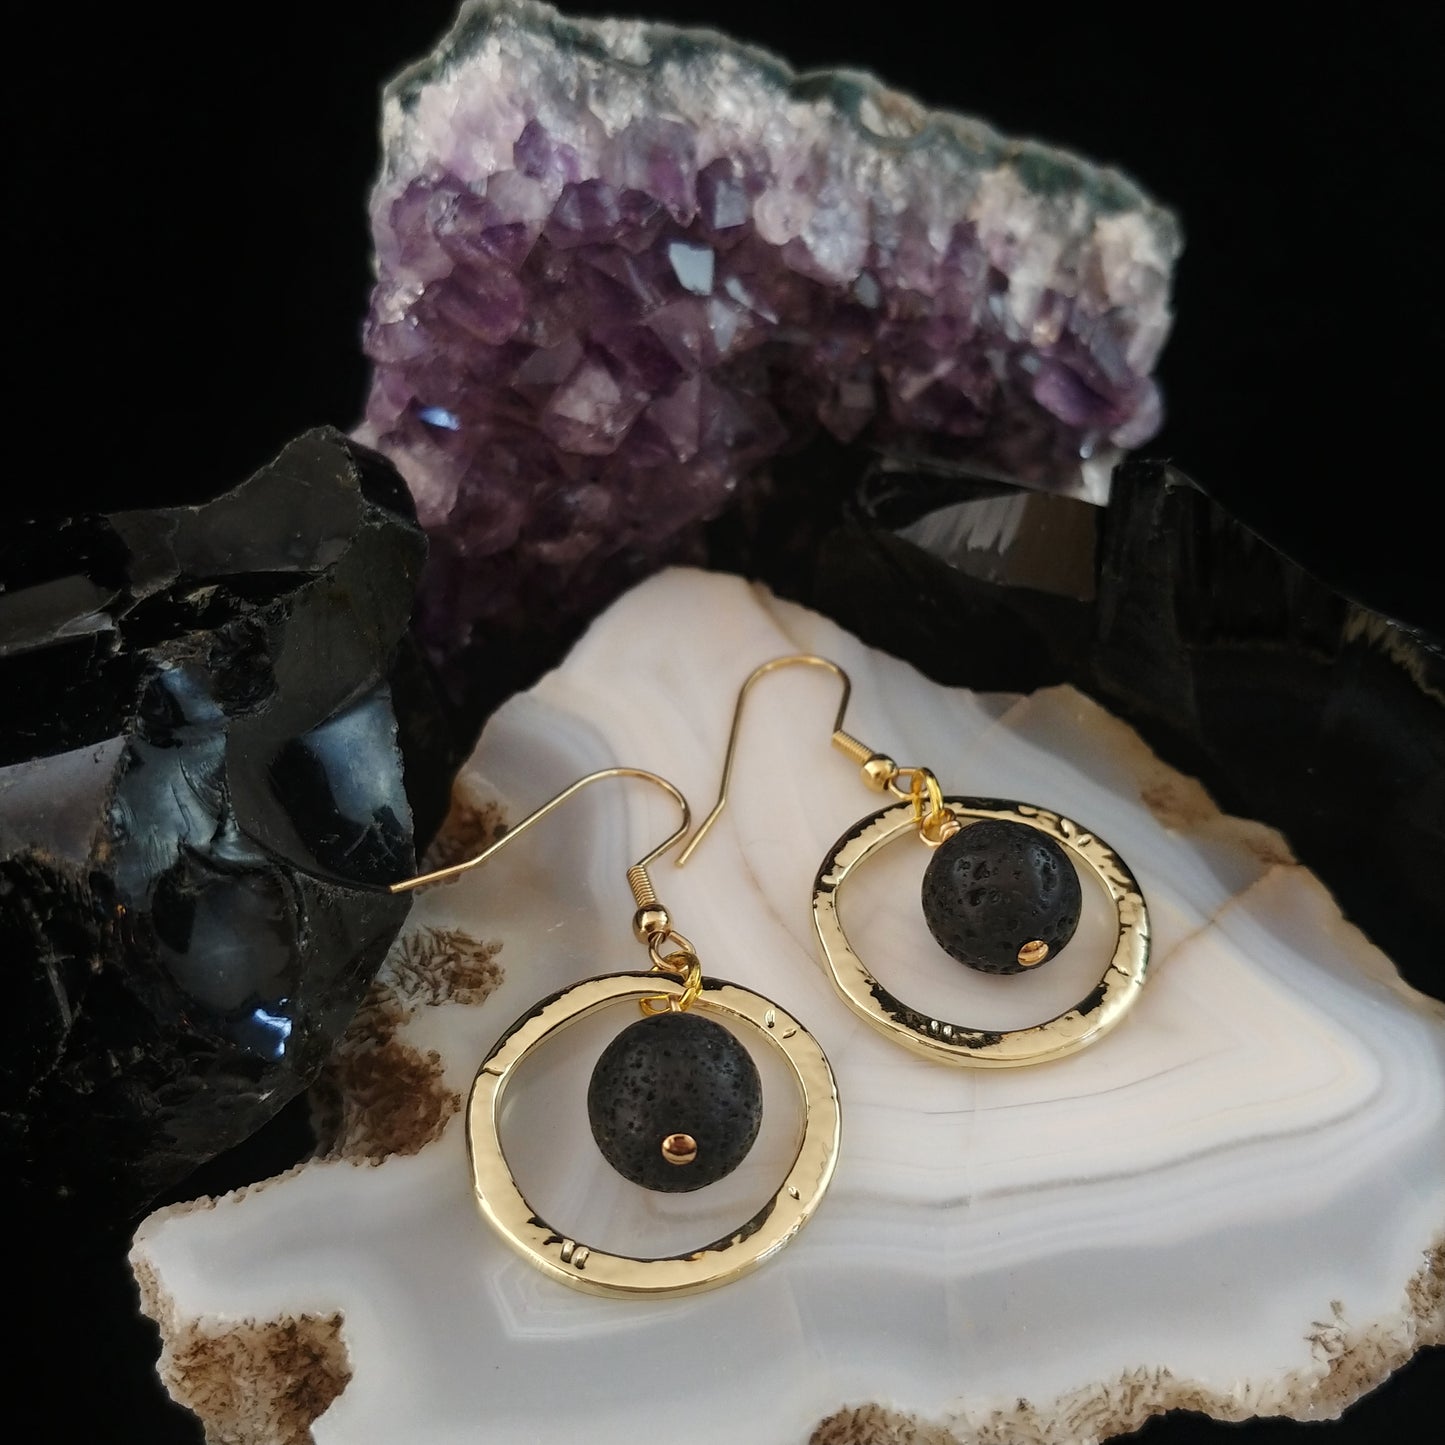 Golden circle earrings with golden alloy ring with black lava beads in the center.